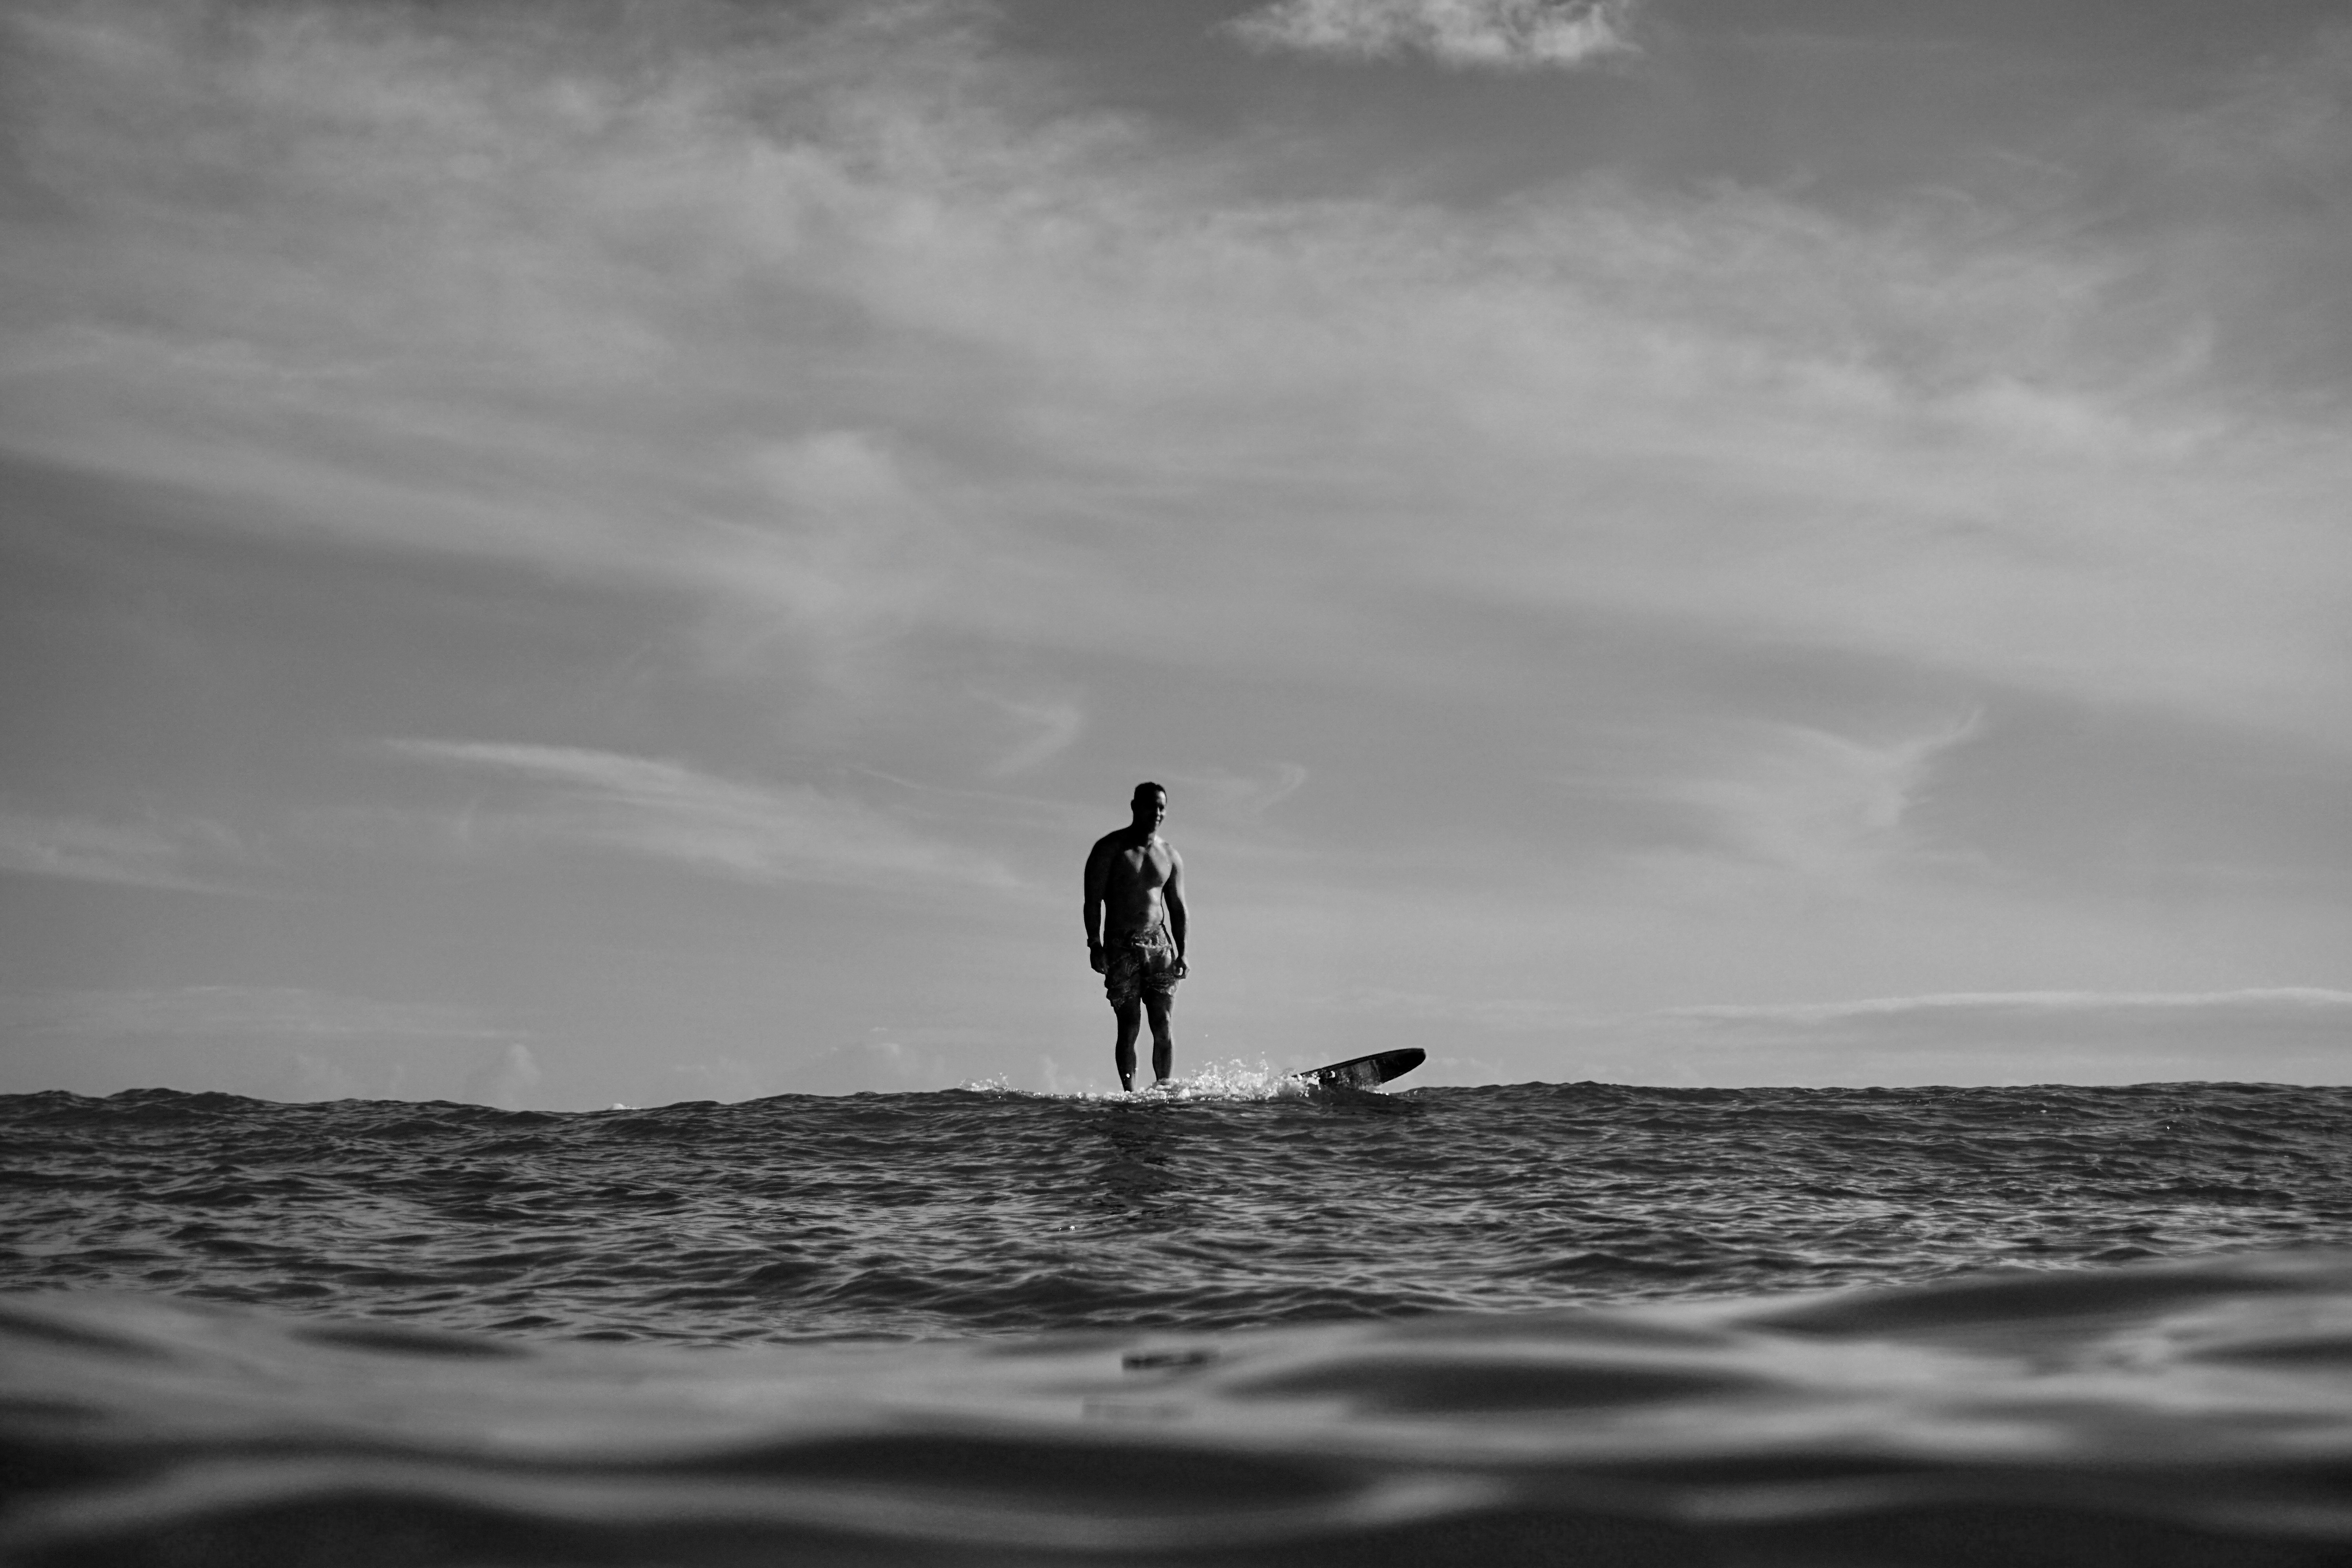 silhouette of man standing on surfboard in the middle of the sea